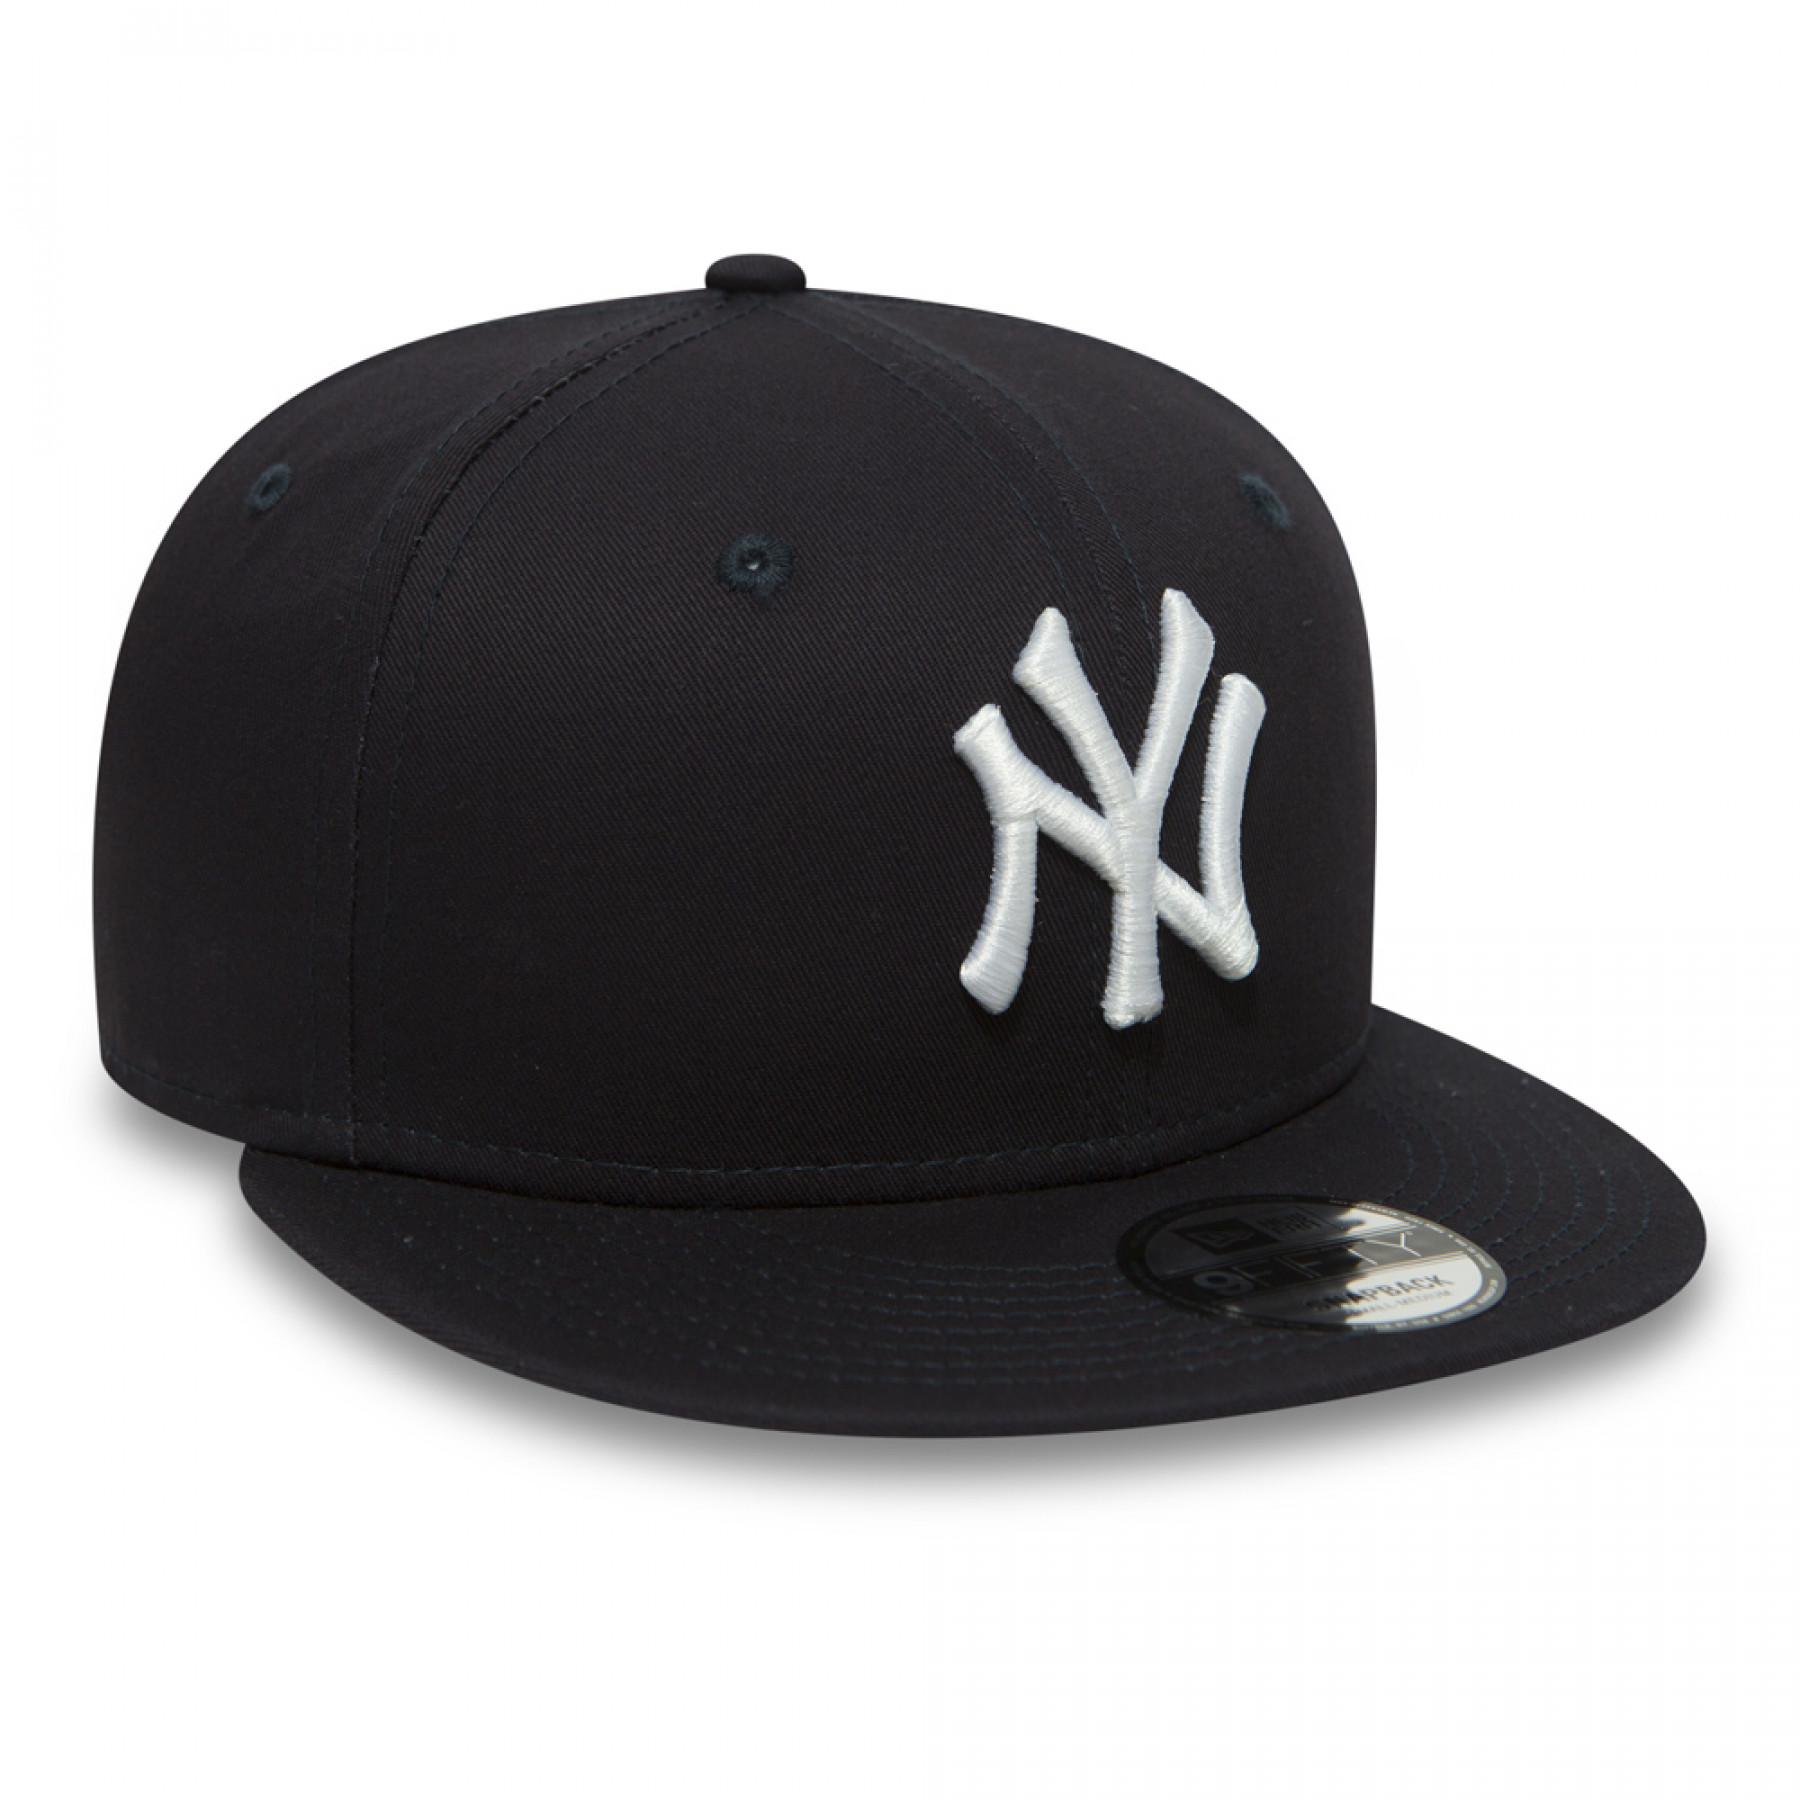 Casquette New Era essential 9fifty Snapback New York Yankees